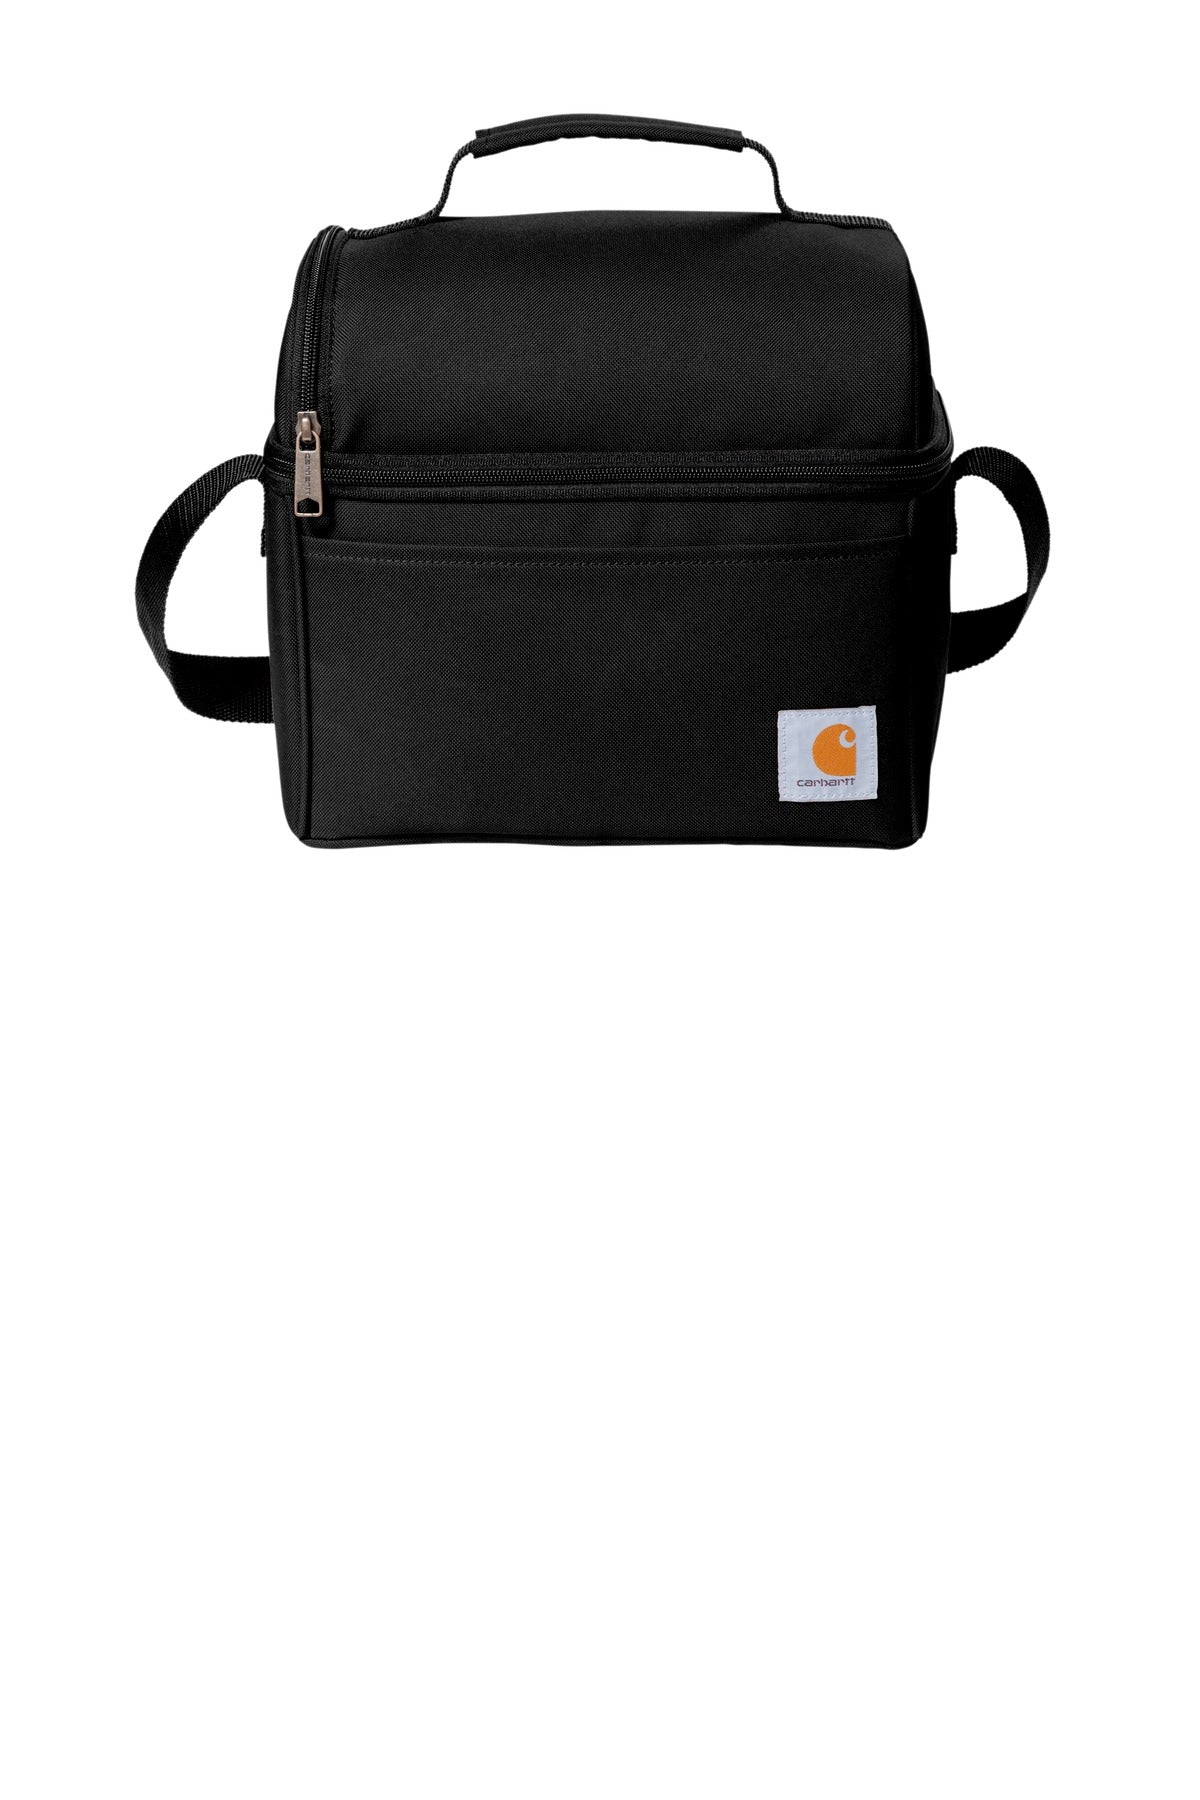 Carhartt® Lunch 6-Can Cooler. CT89251601 - DFW Impression